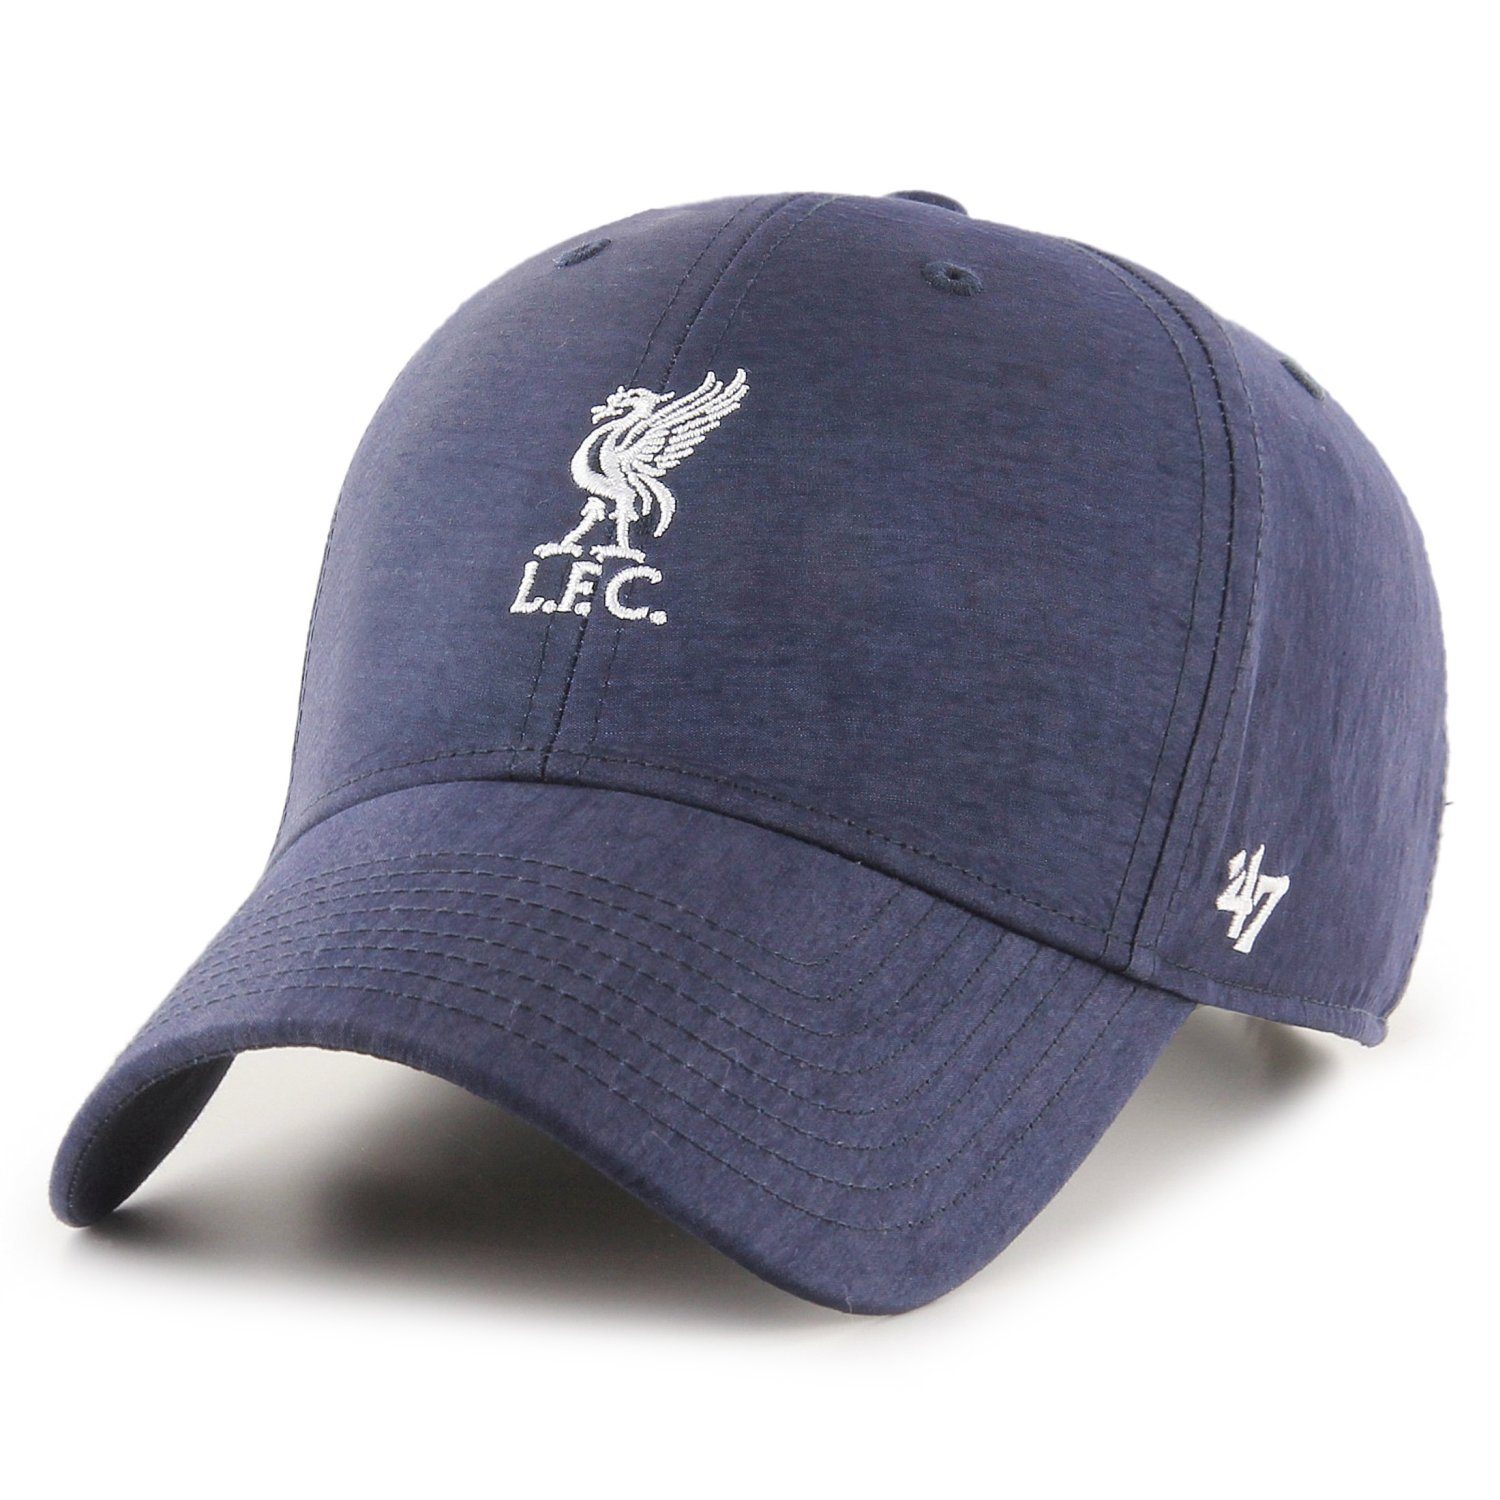 '47 Brand Trucker Cap Relaxed Fit MONTEREY FC Liverpool